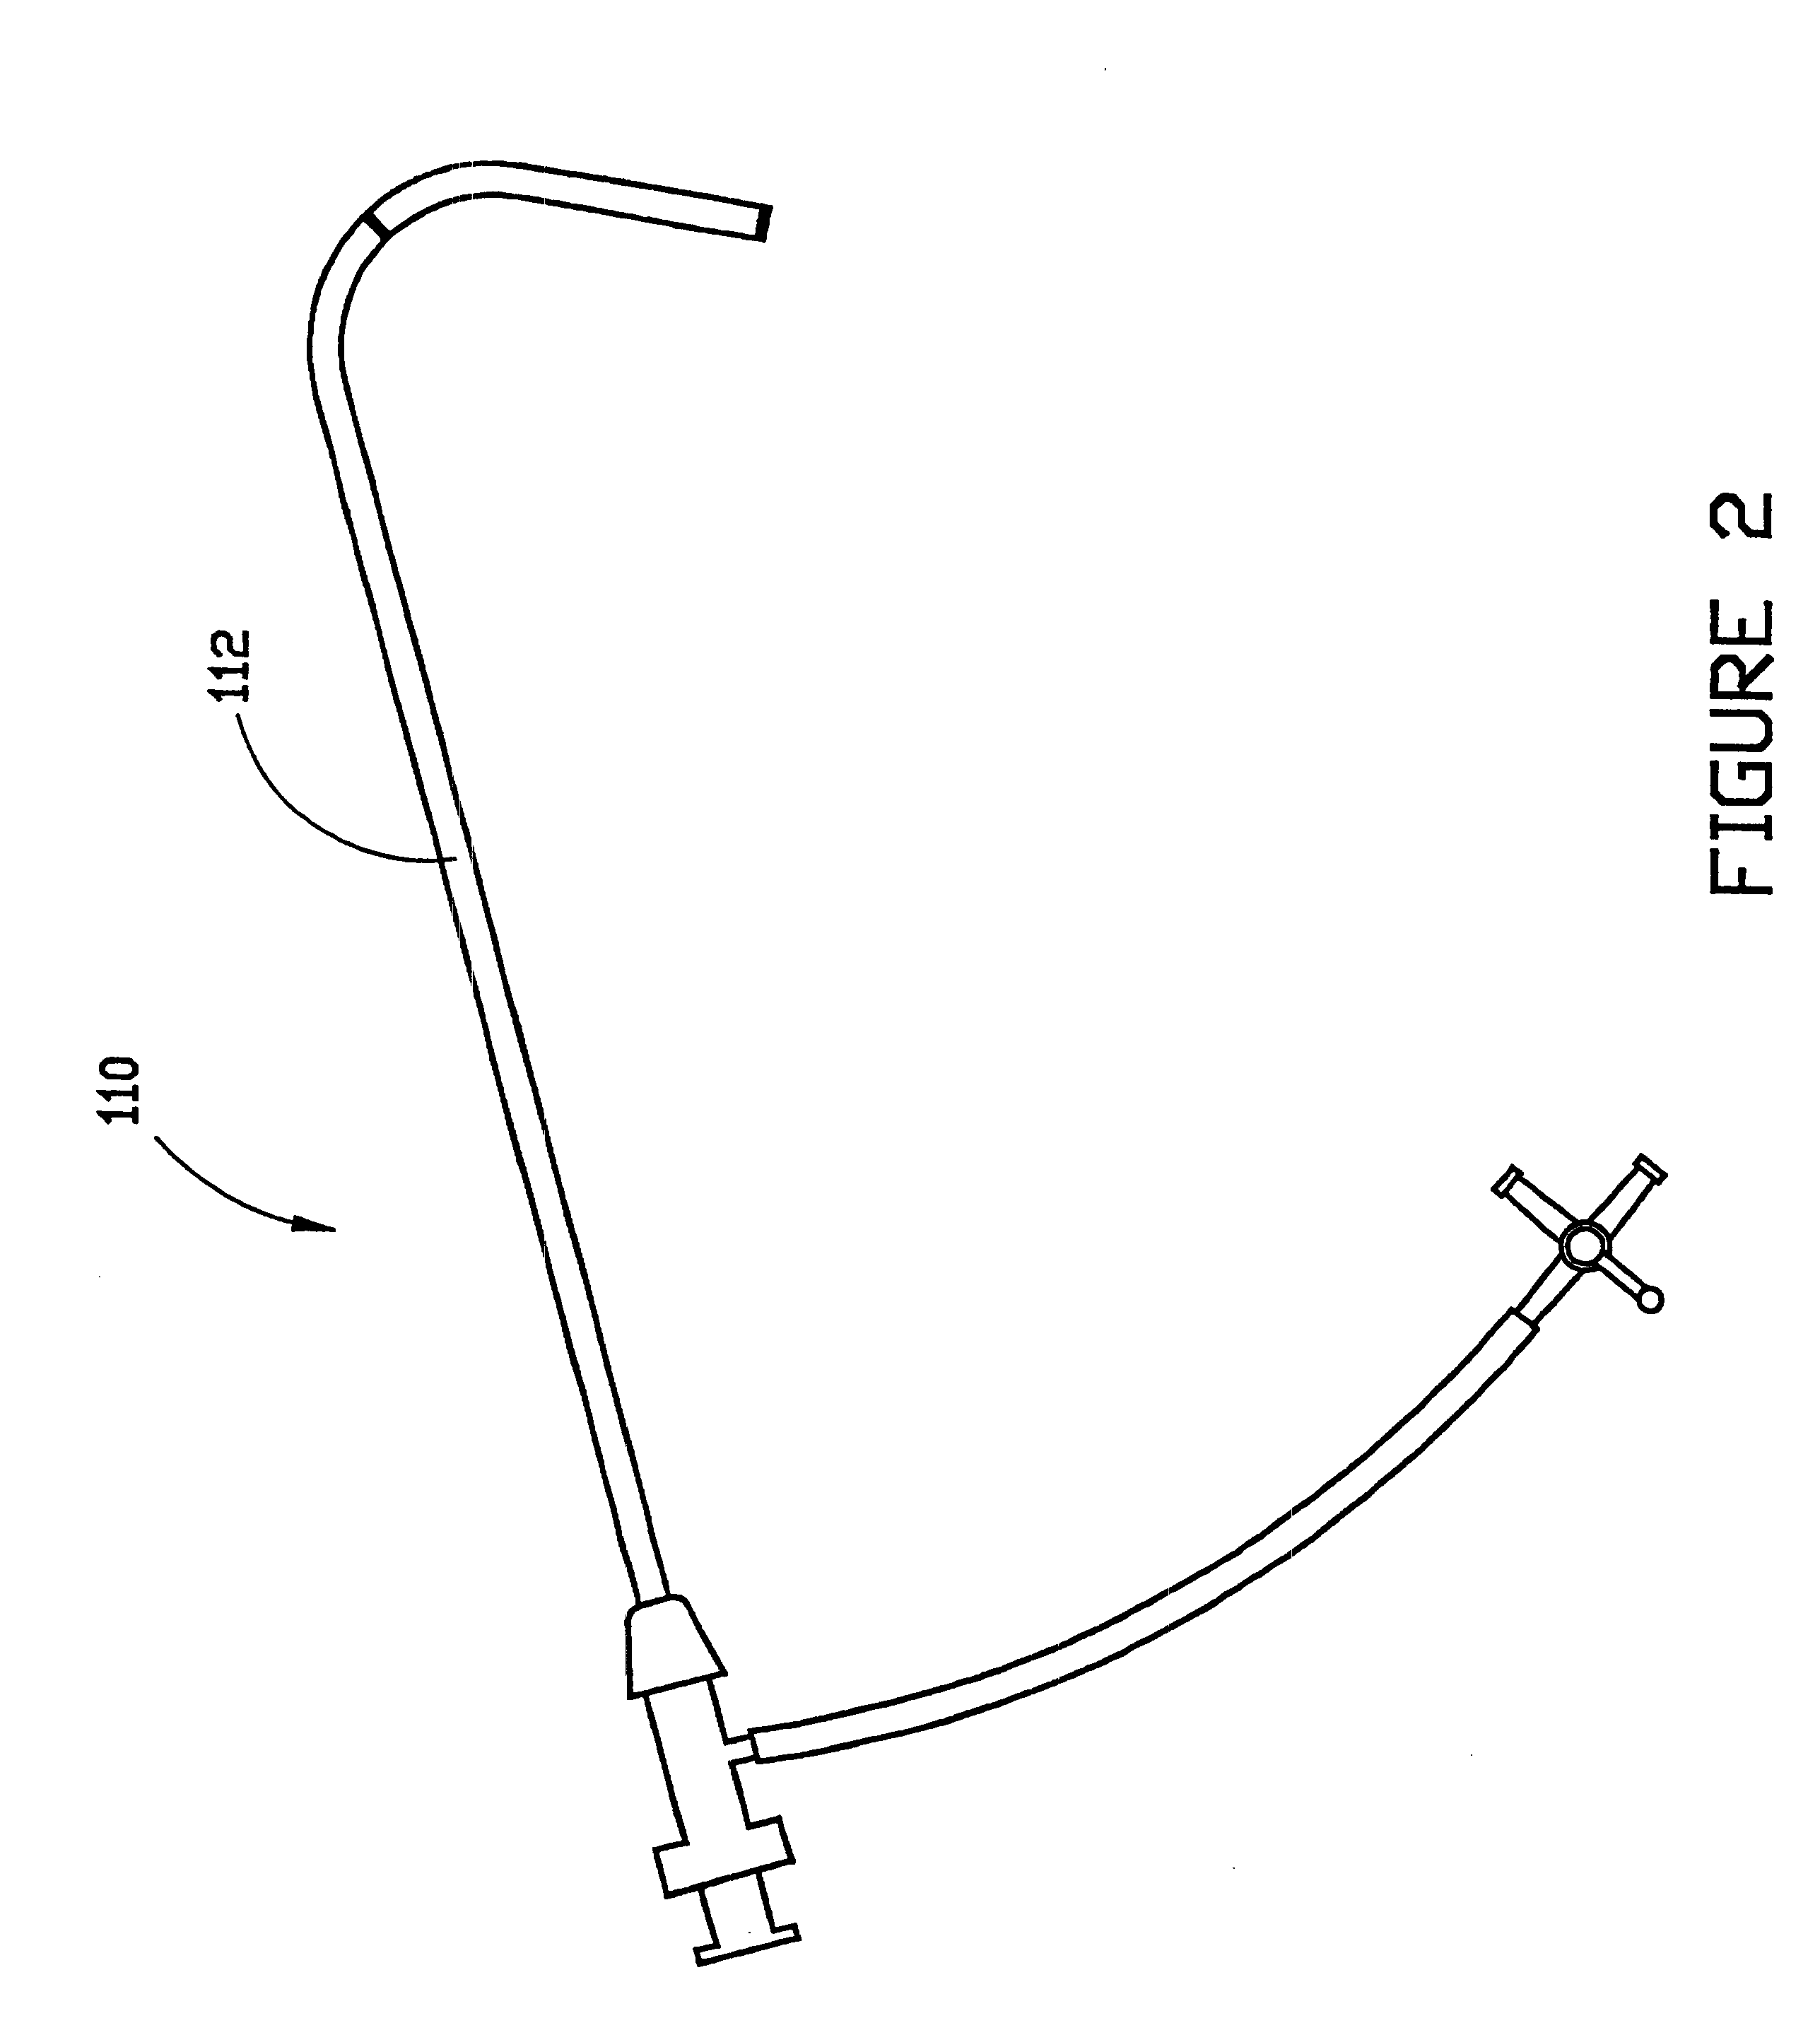 Method for treating a cardiovascular condition